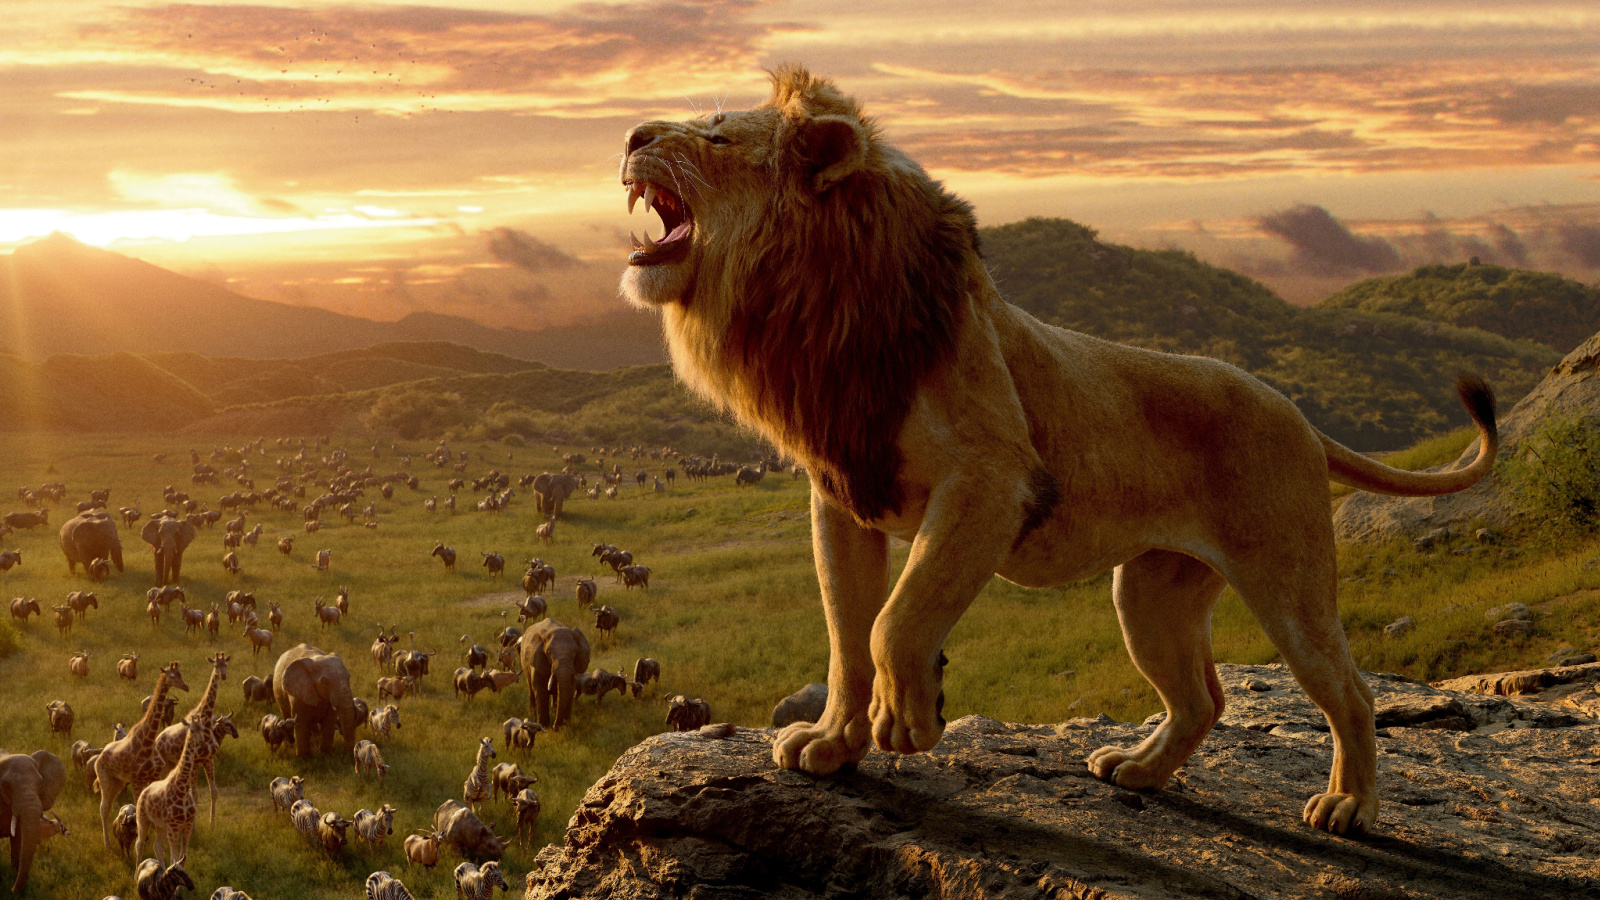 image credit: Ab00d0_0/Shutterstock <p><span>Mufasa’s explanation of the Circle of Life to young Simba is not just a fatherly lesson but a profound reflection on the interconnectedness of all living things. James Earl Jones’ deep, authoritative voice lends a majestic and timeless quality to the monologue, grounding the film’s fantastical elements in a relatable wisdom. This scene is a cornerstone of the movie, imparting lessons of responsibility and respect for nature that resonate across ages.</span></p>